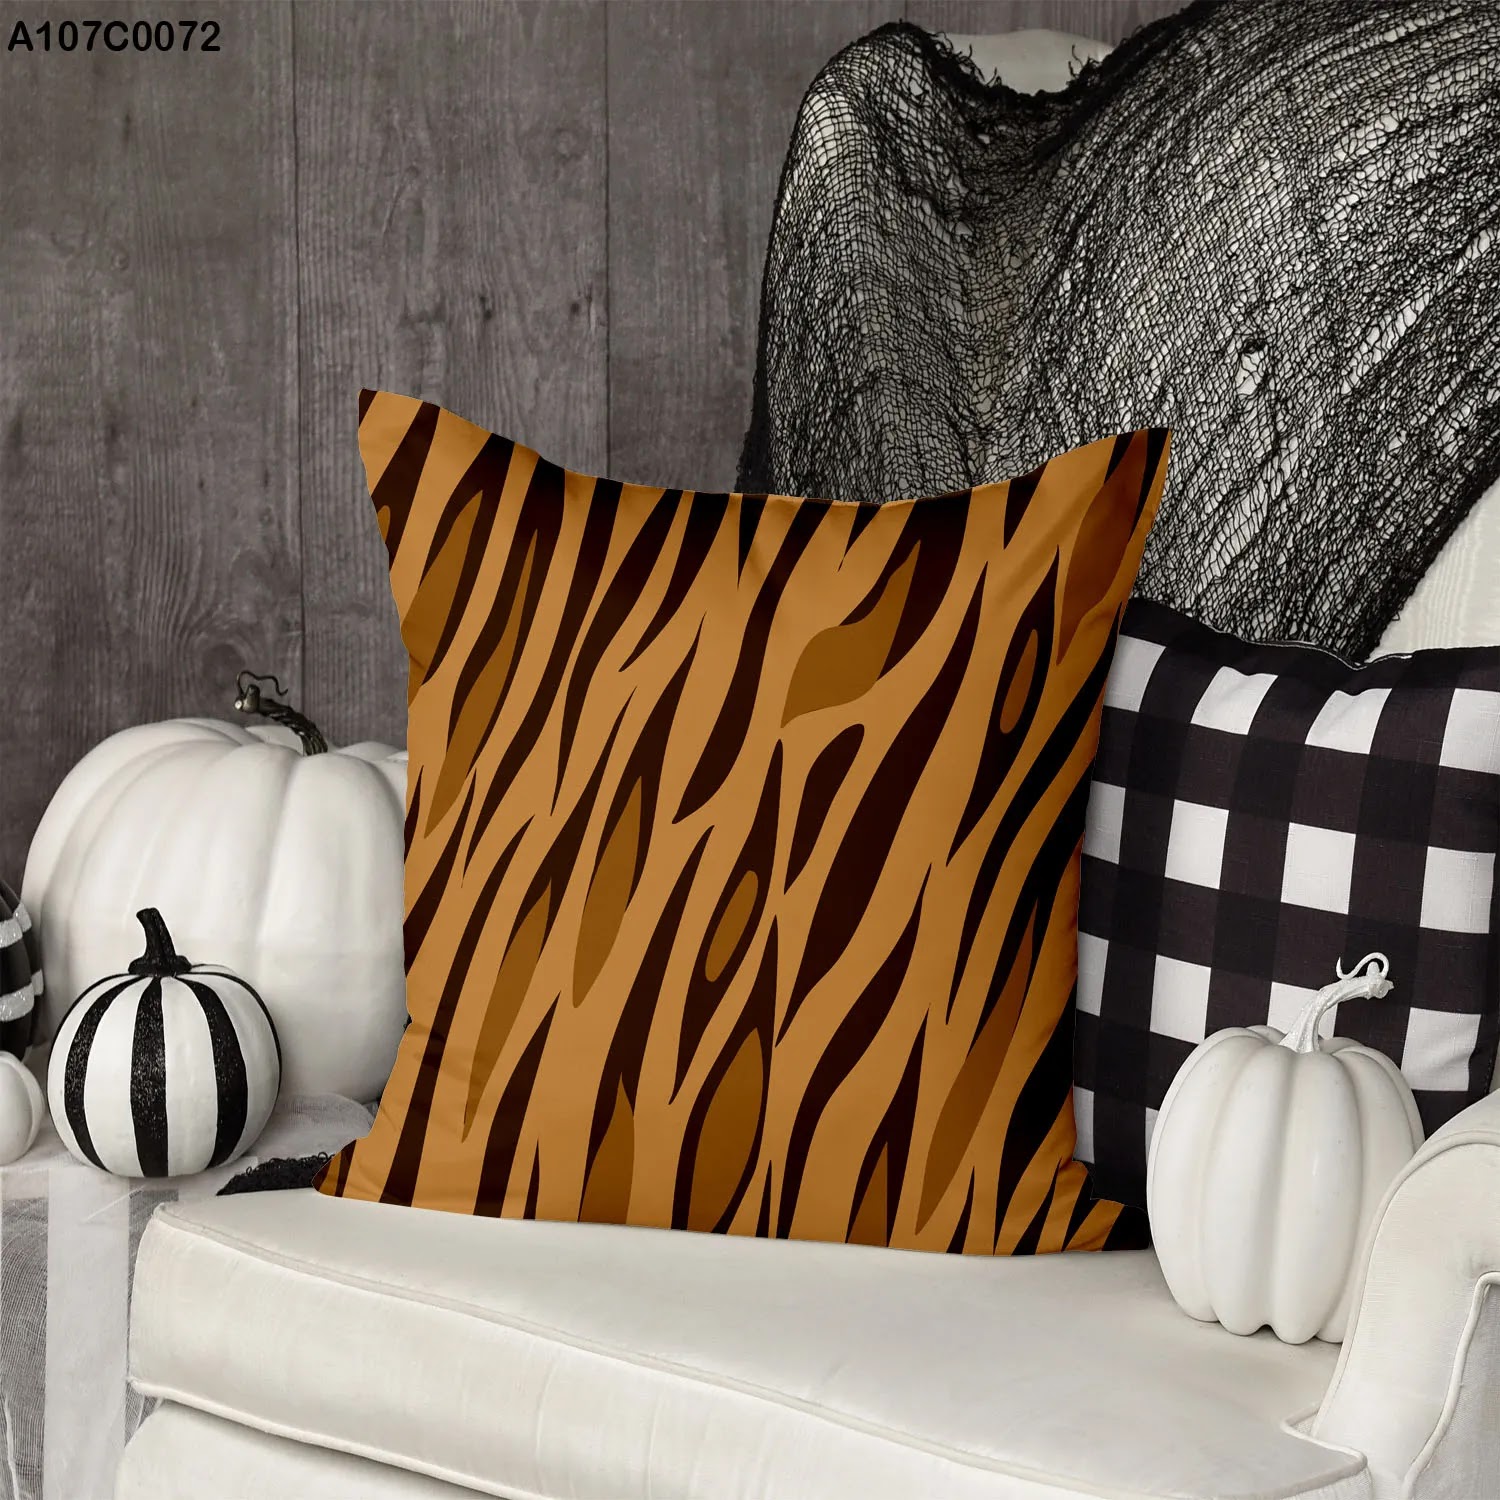 Pillow case with brown tiger skin pattern